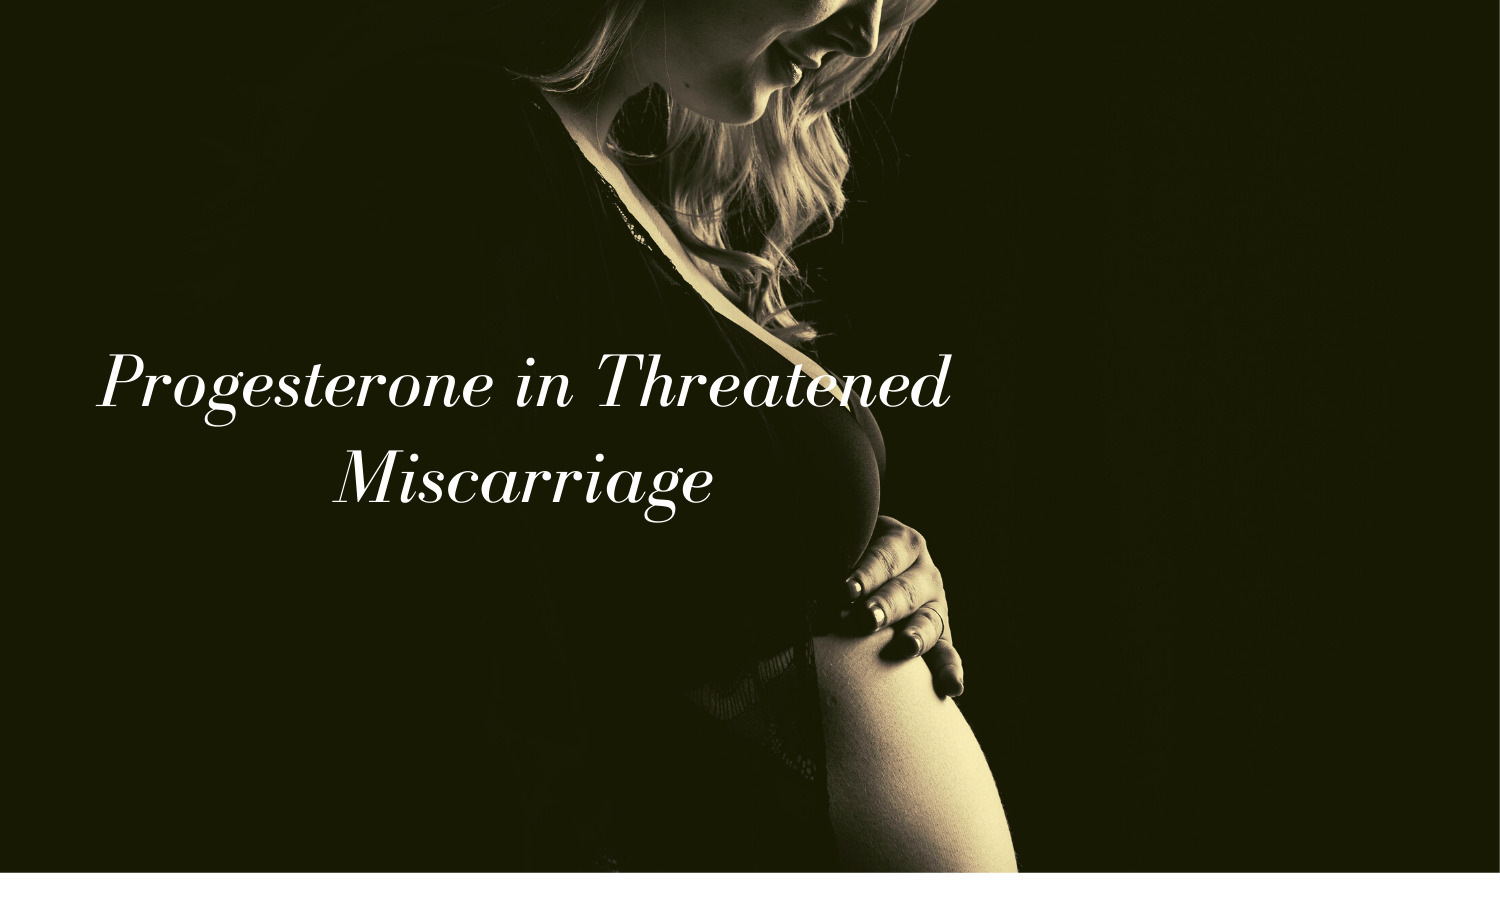 Oral Micronized Progesterone Carries Higher Risk Of Miscarriage Shows Meta Analysis